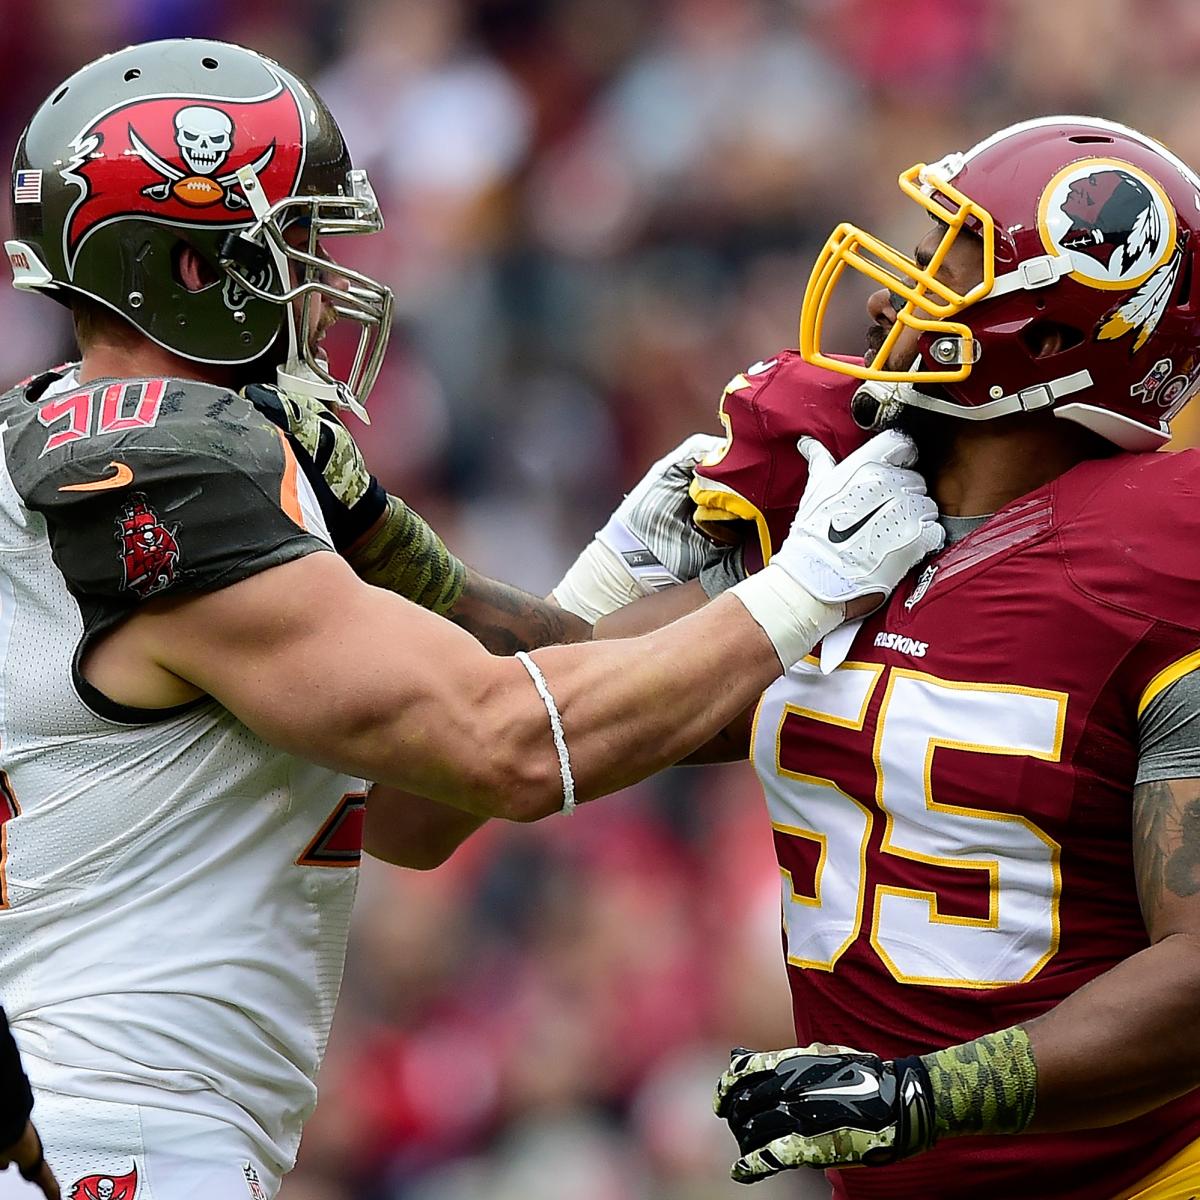 Redskins vs. Buccaneers: Game preview, how to watch, and more